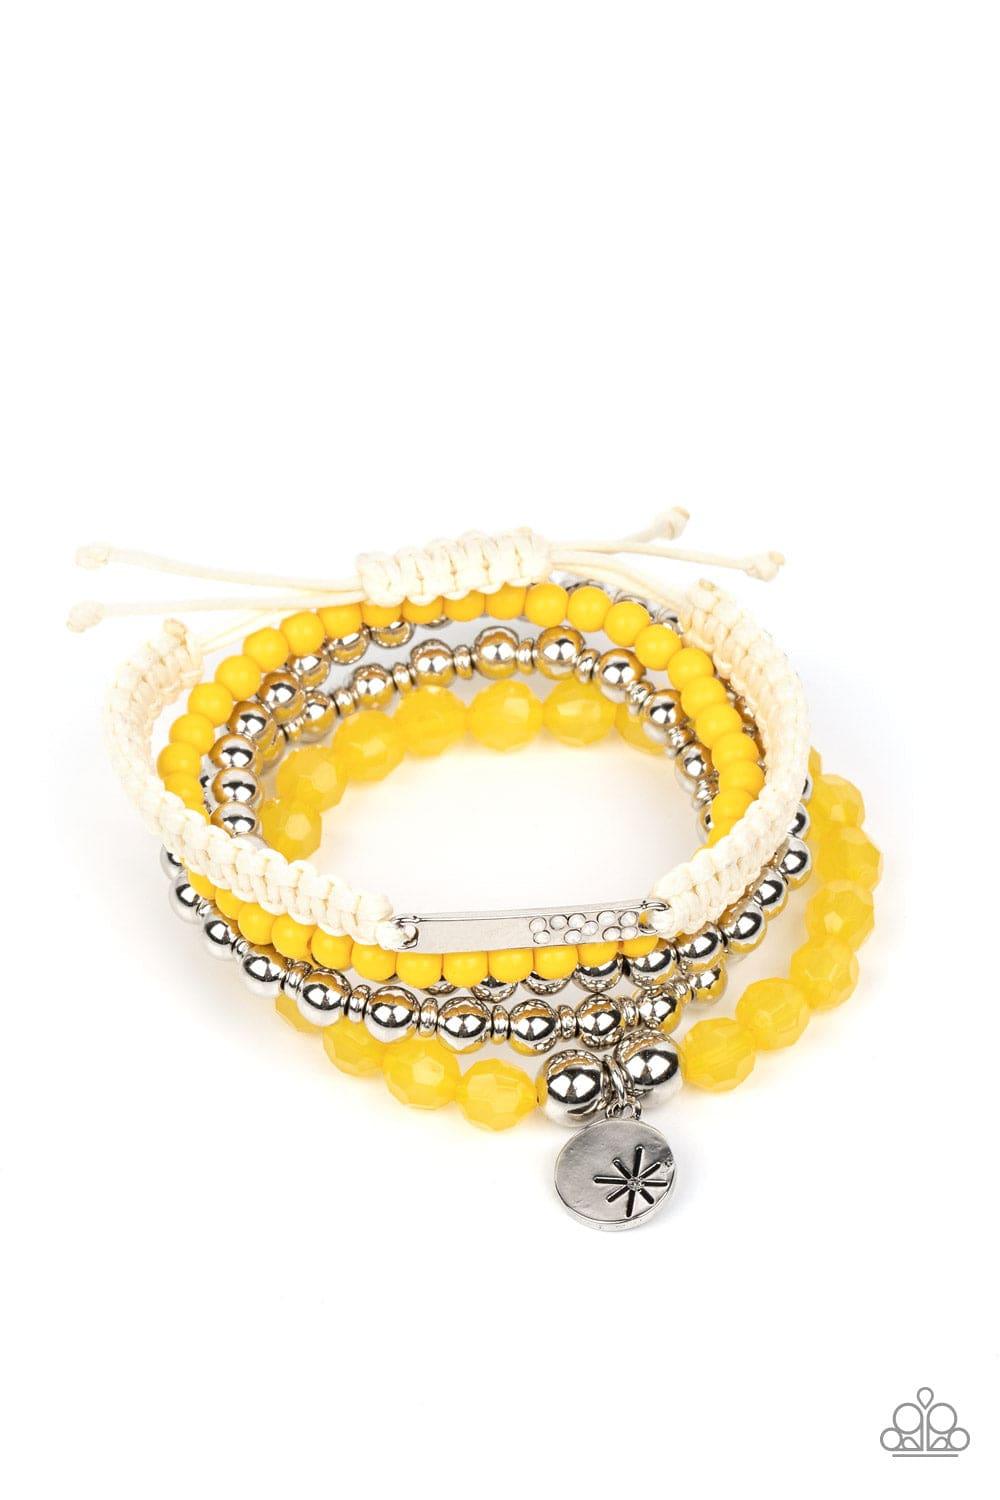 Paparazzi Accessories - Offshore Outing - Yellow Bracelet - Bling by JessieK